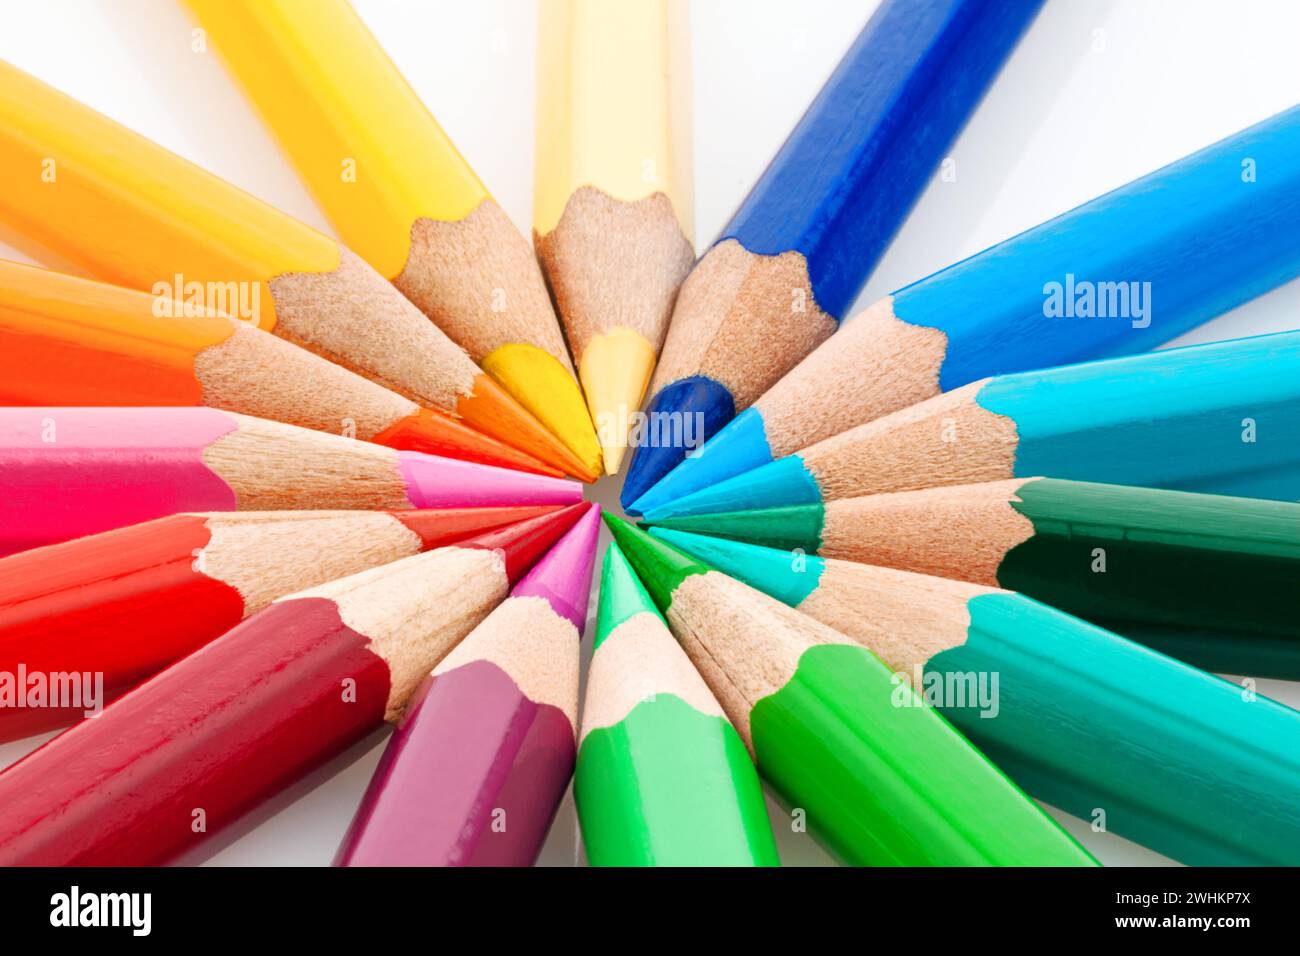 Lots of different coloured pencils on a white background Stock Photo